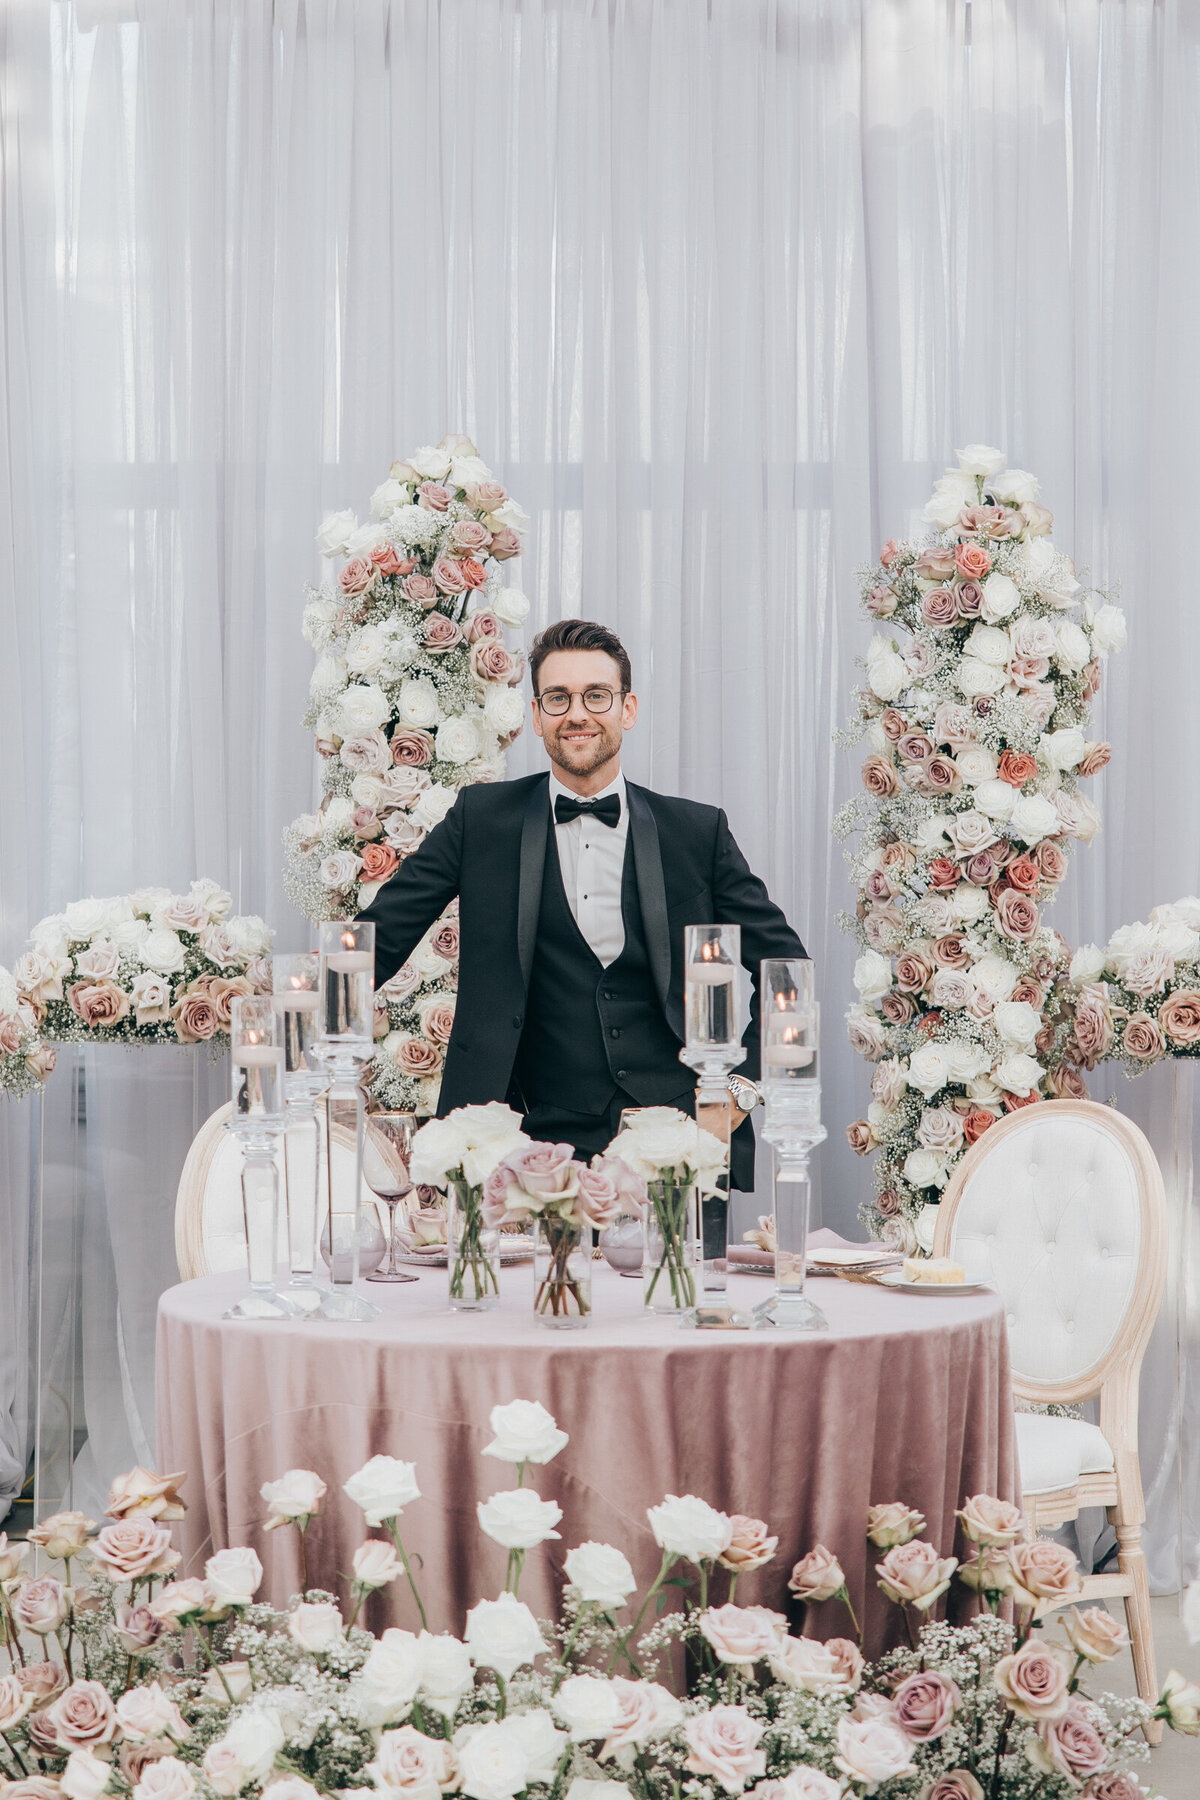 RL Designs wedding designer standing with white and blush roses photographed by Nova Markina Photography